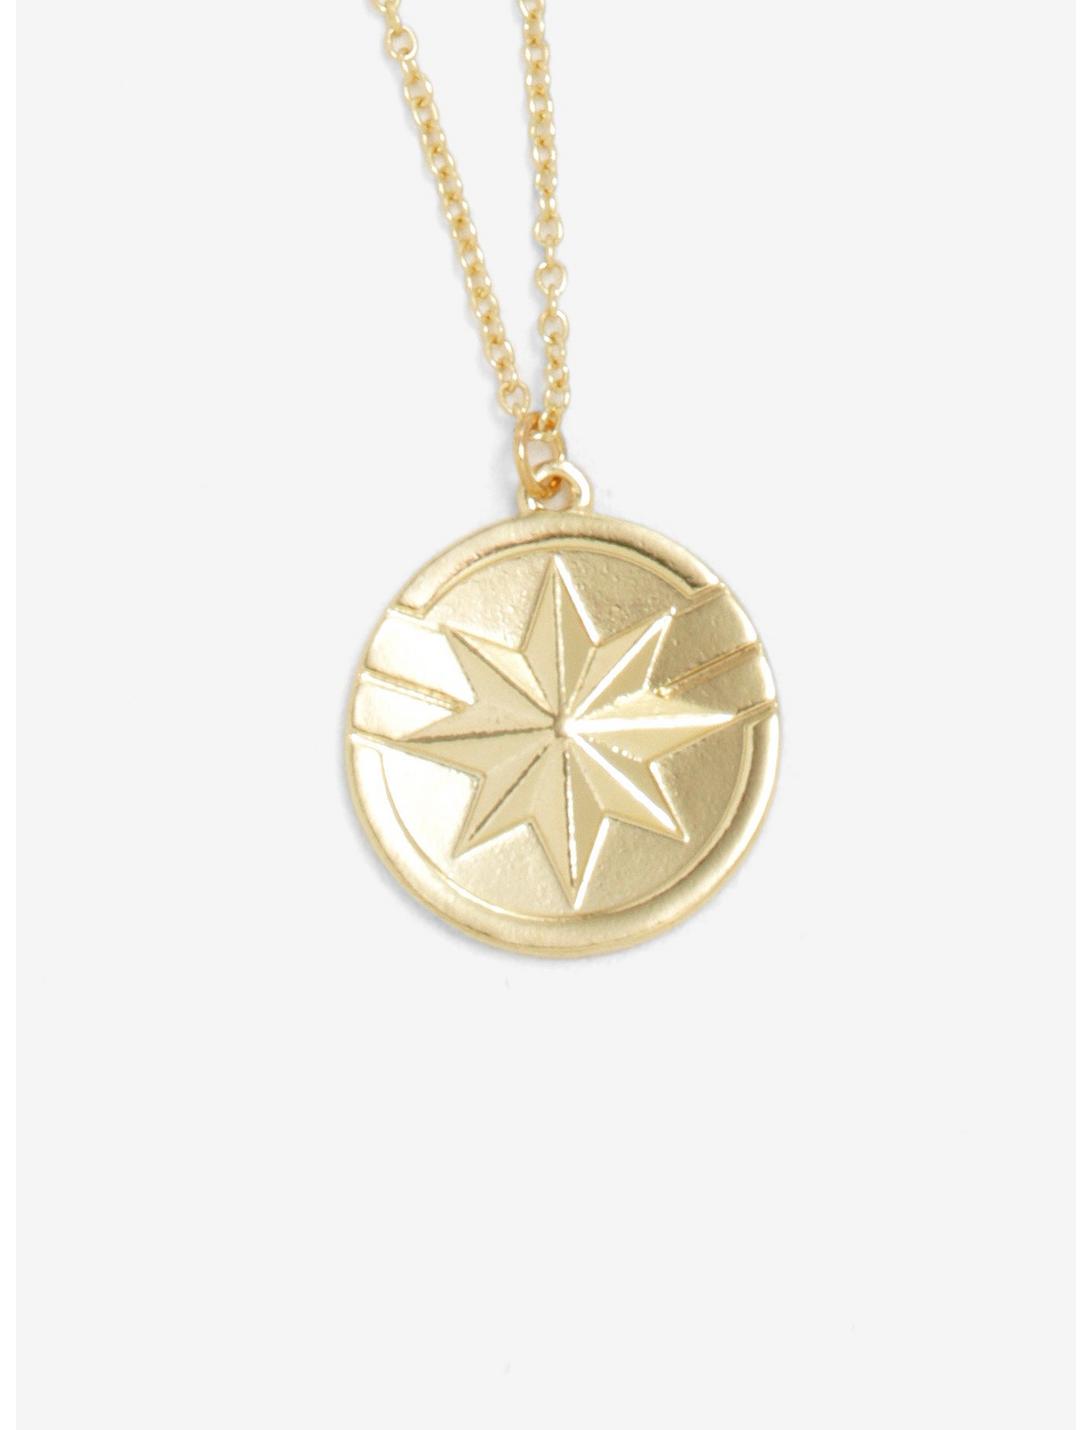 Marvel Captain Marvel Coin Necklace - BoxLunch Exclusive, , hi-res